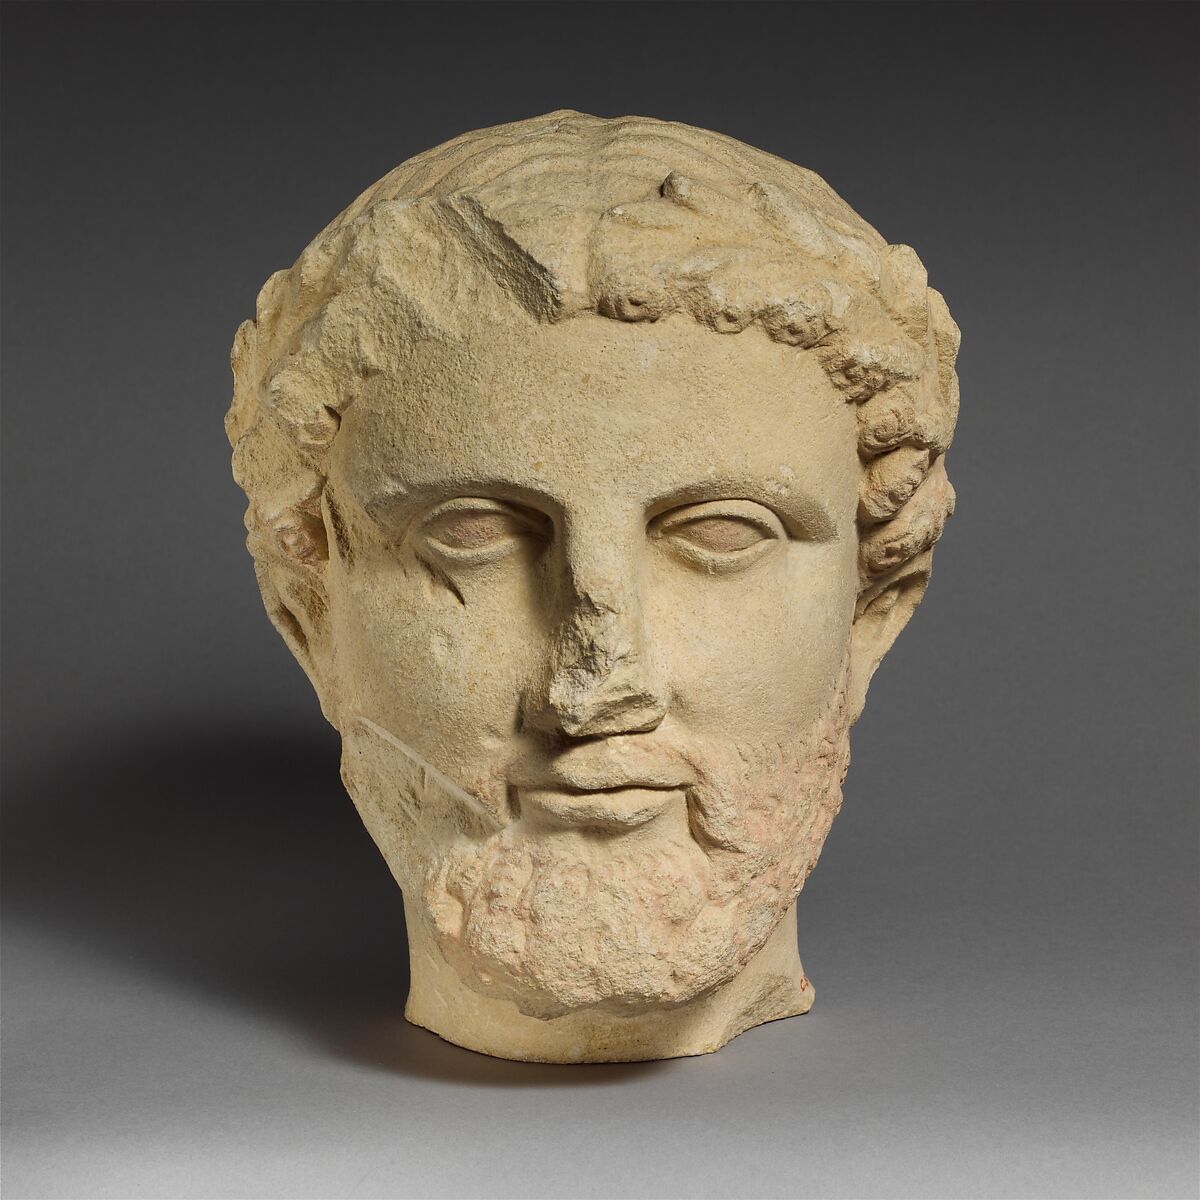 Limestone bearded head with a wreath of leaves, Limestone, Cypriot 